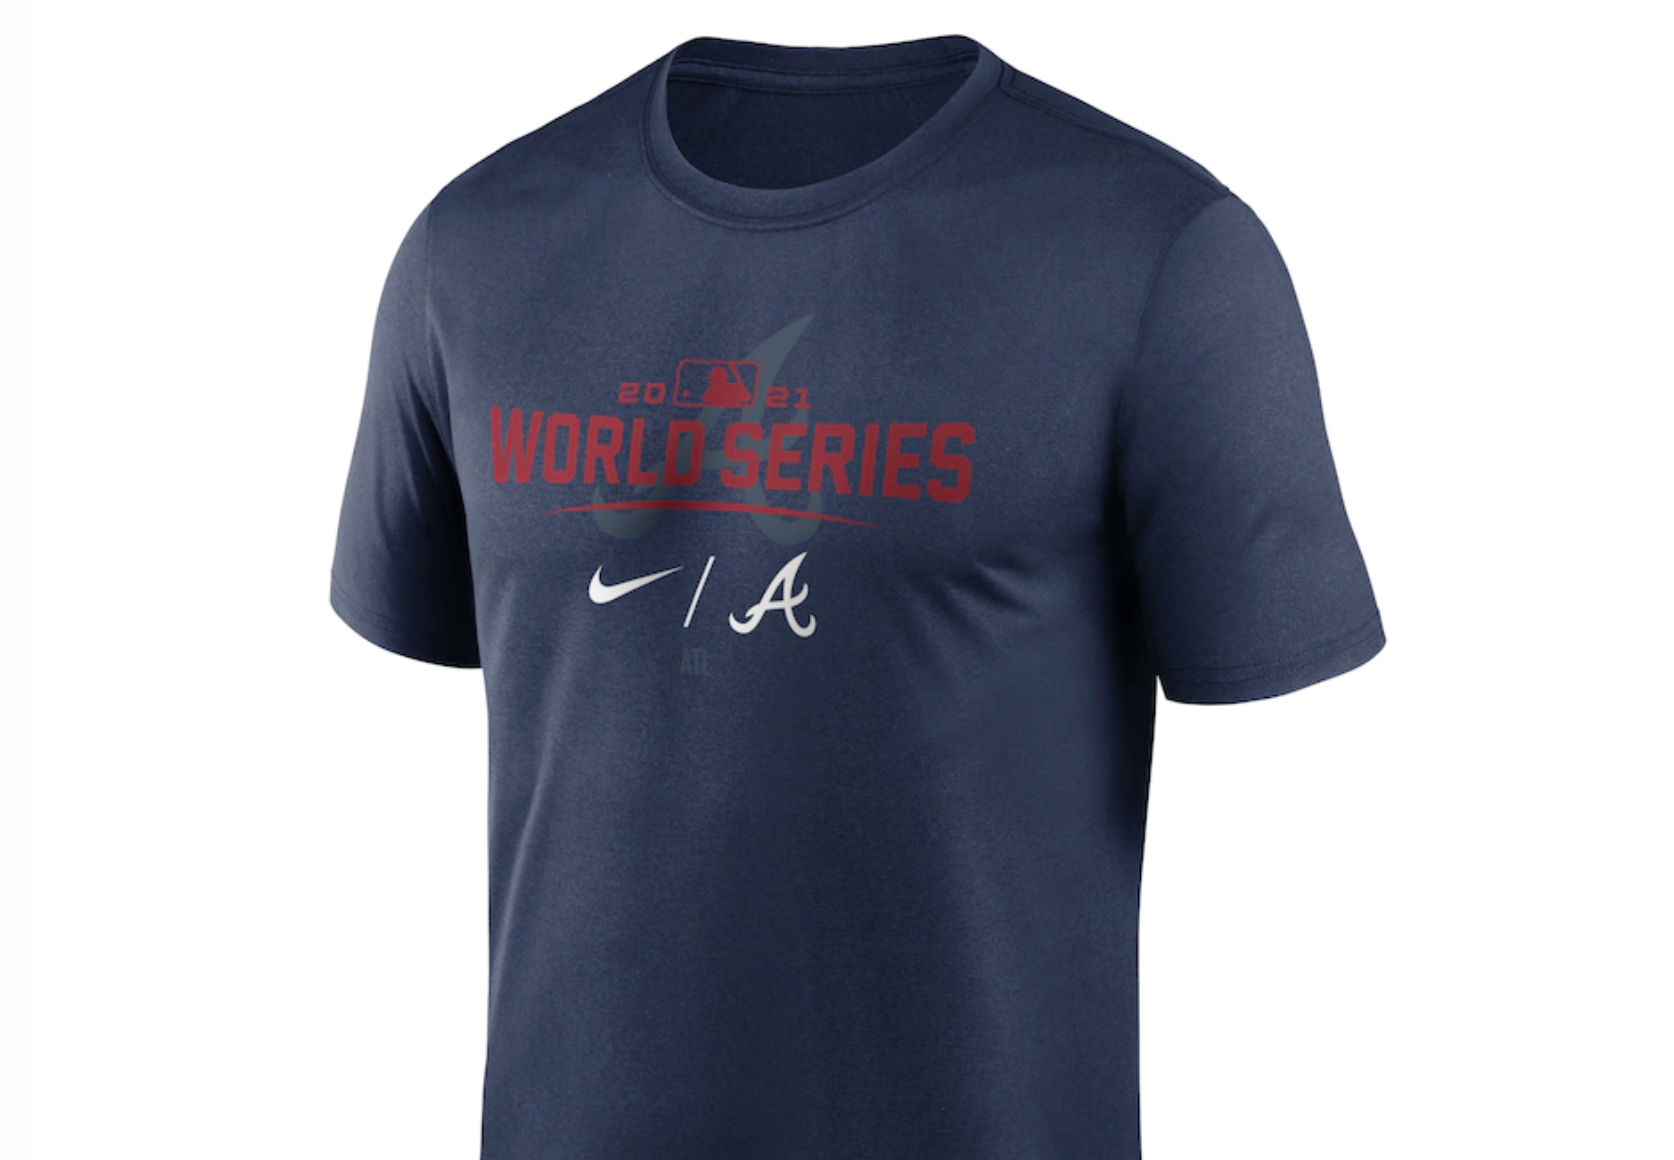 Atlanta Braves World Series championship gear: Here's how to get shirts,  jerseys, hats and more 